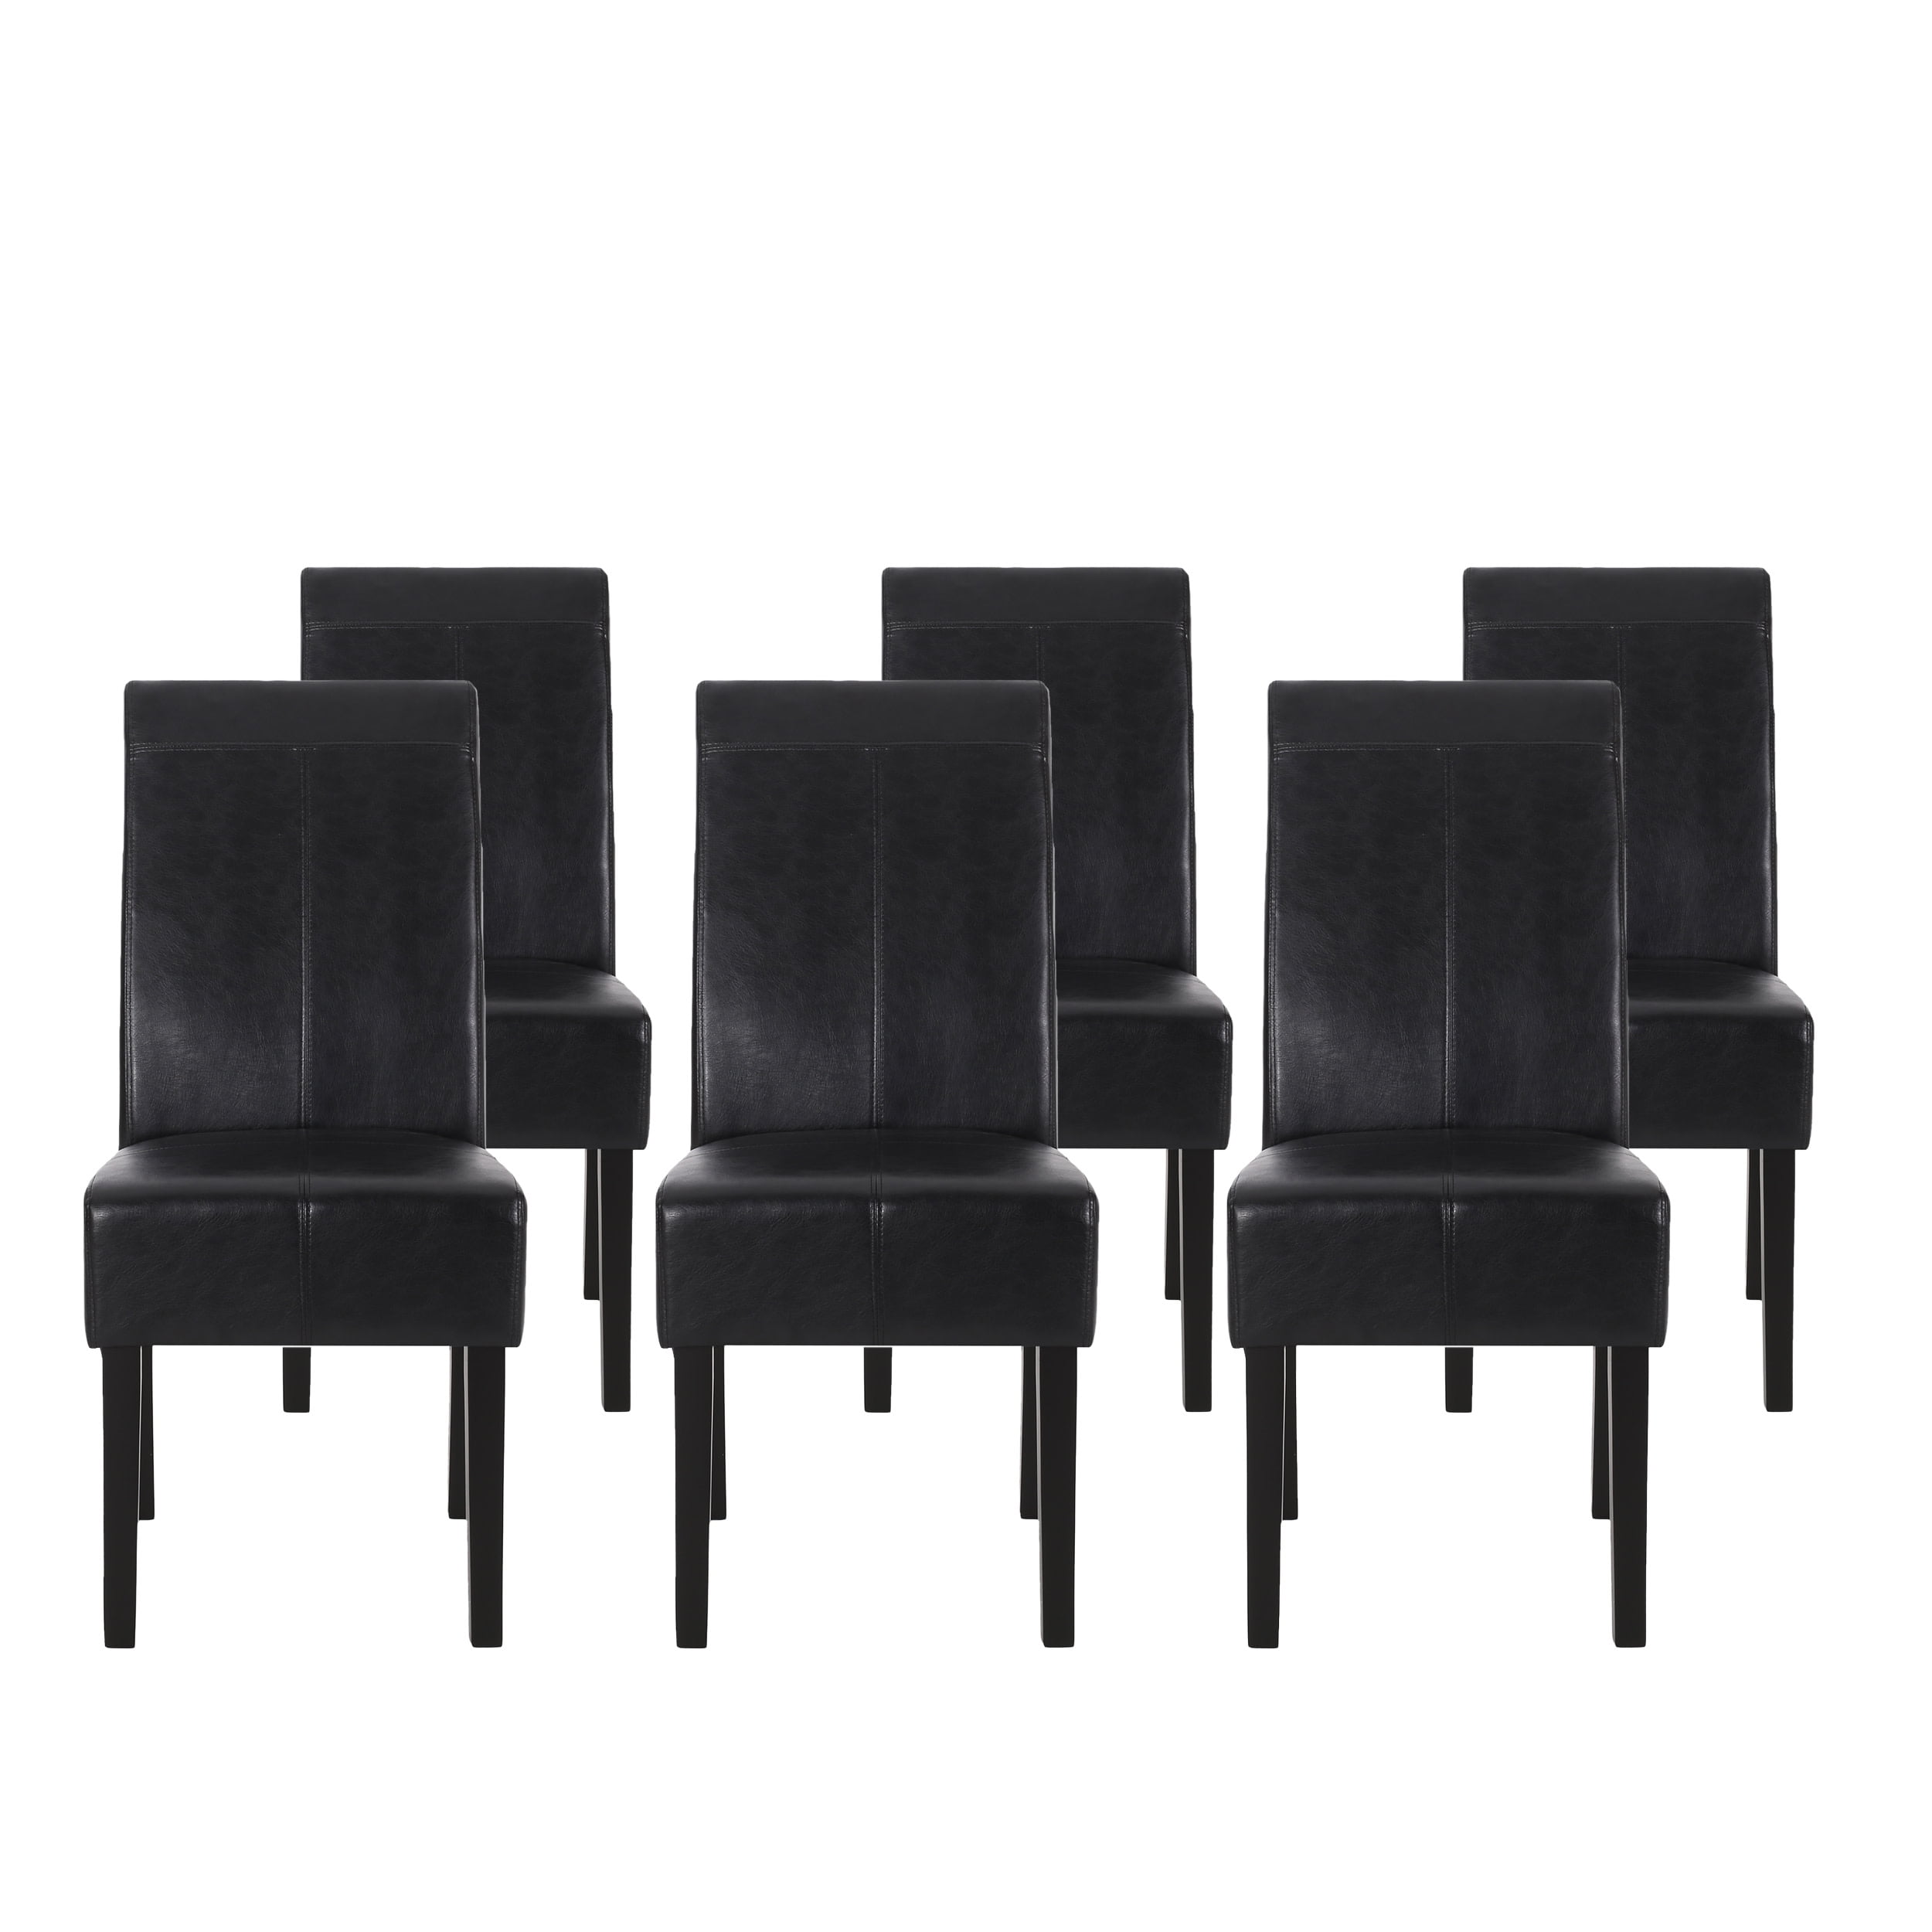 Percival T-Stitch Bonded Leather Dining Chairs (Set of 2) – GDFStudio